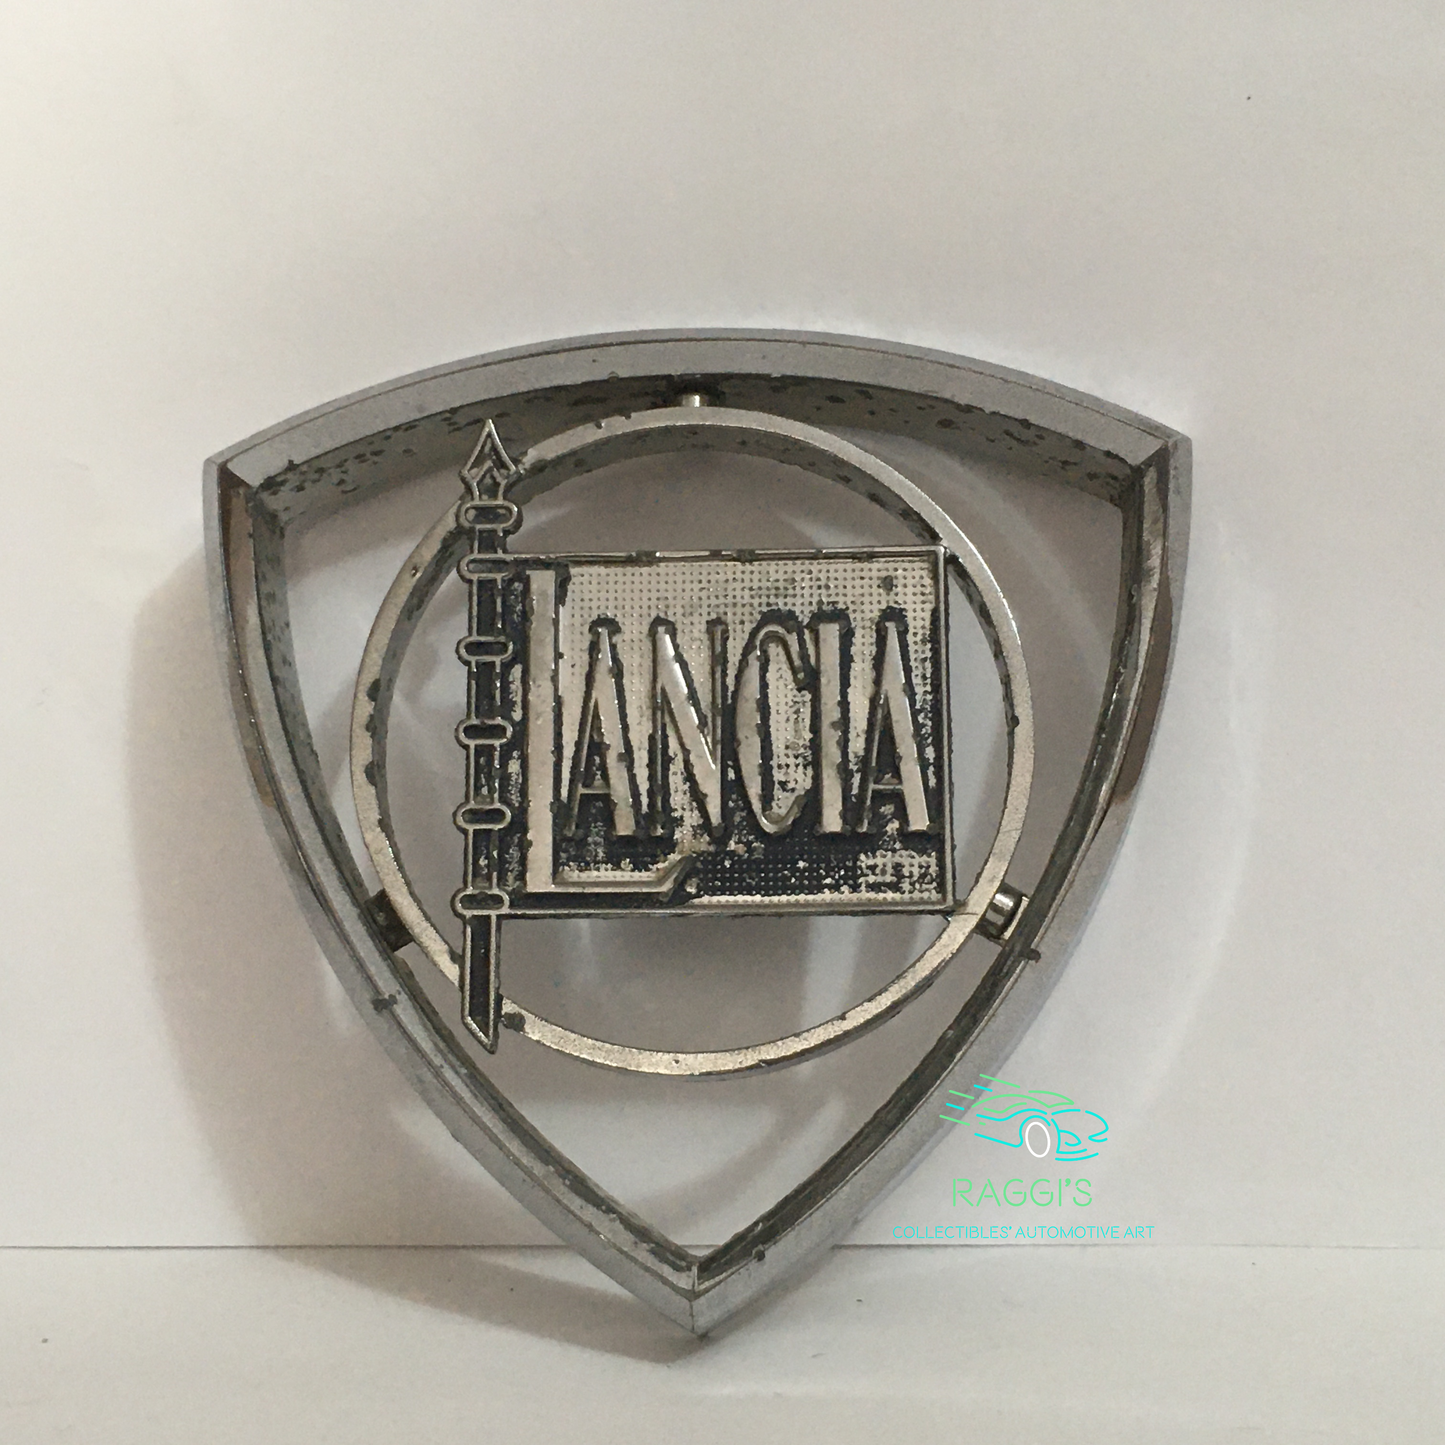 Lancia, Original Lancia emblem in metal mounted on cars produced since the 1950s